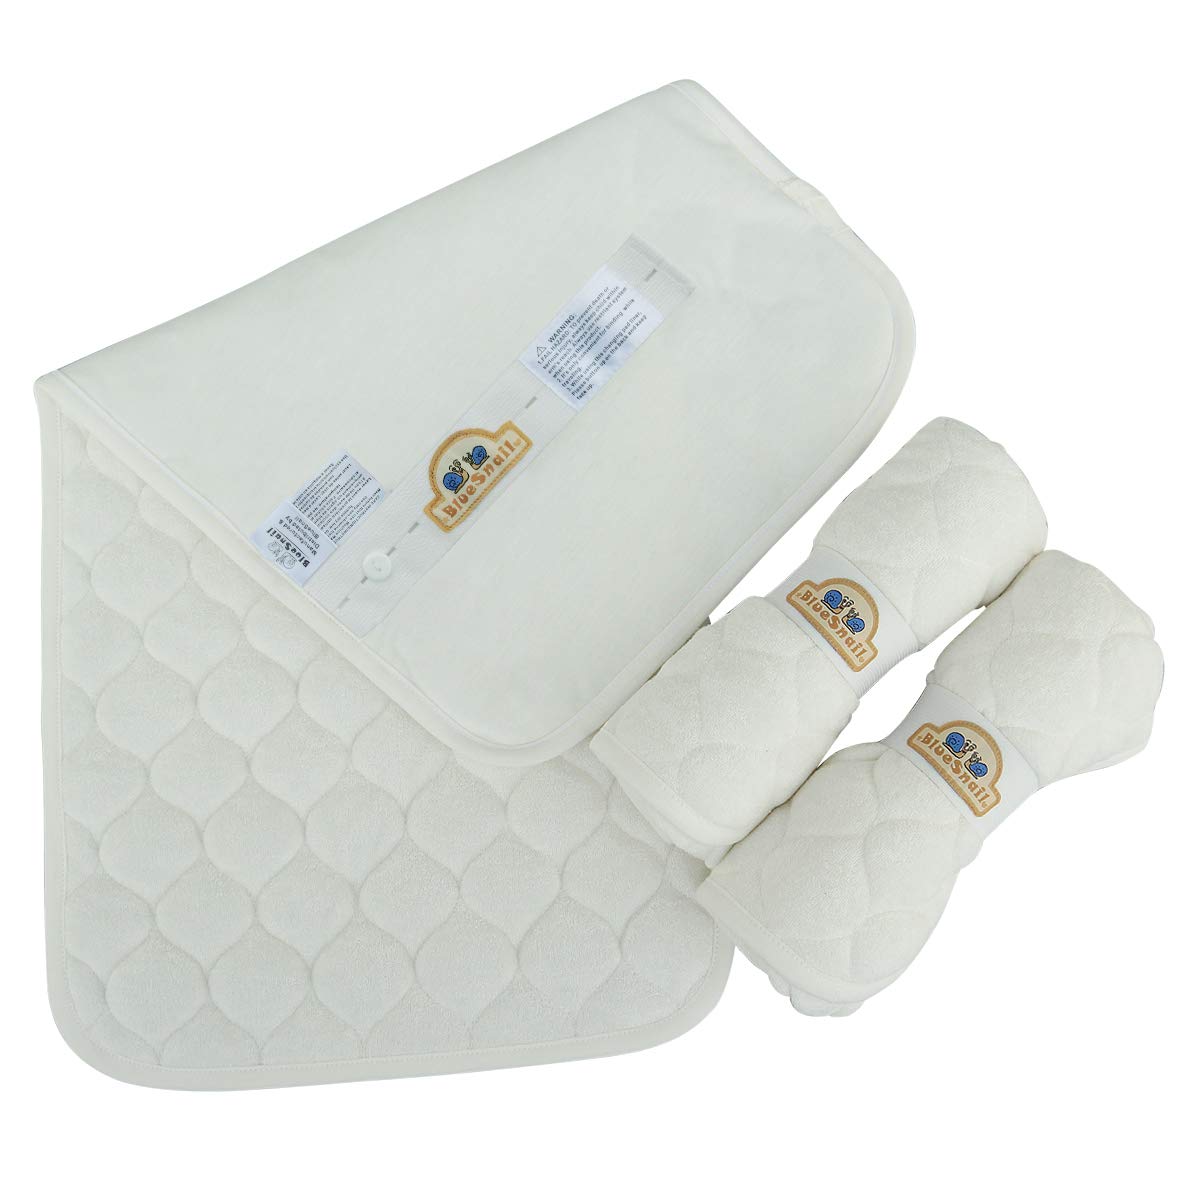 White Bamboo Quilted Thicker Longer Waterproof Changing Pad Liners for Babies 3 Count by Oleh-Oleh